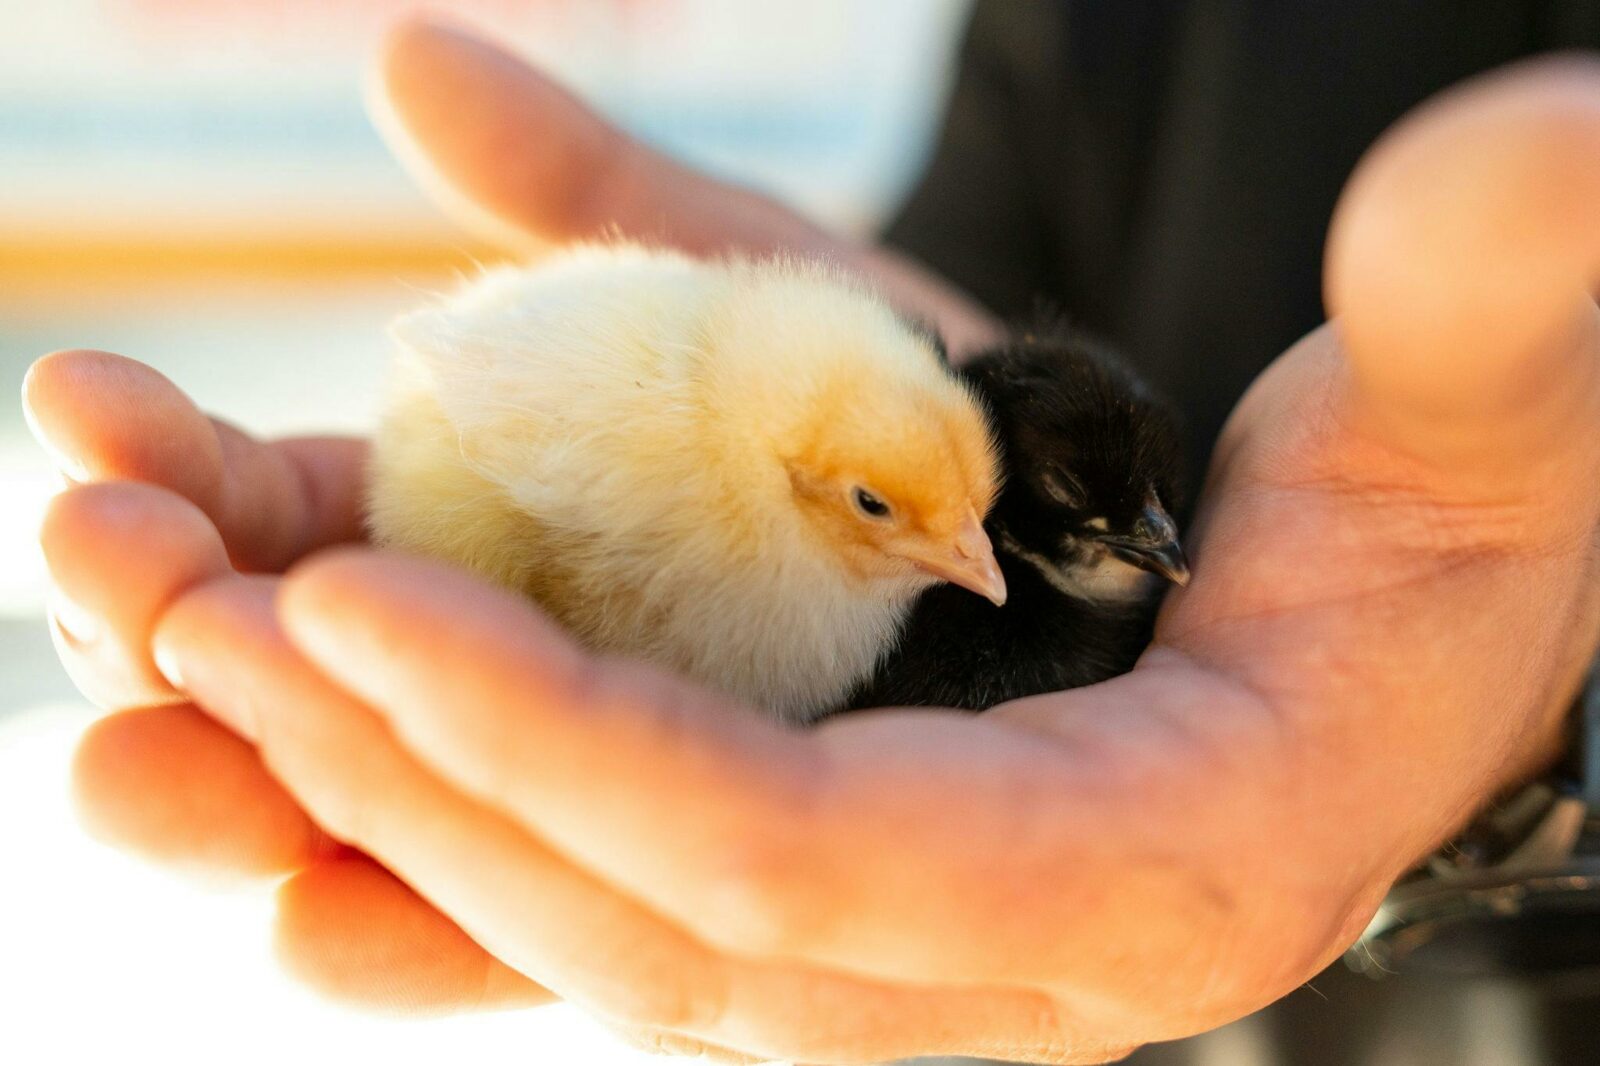 Baby Chickens in hands